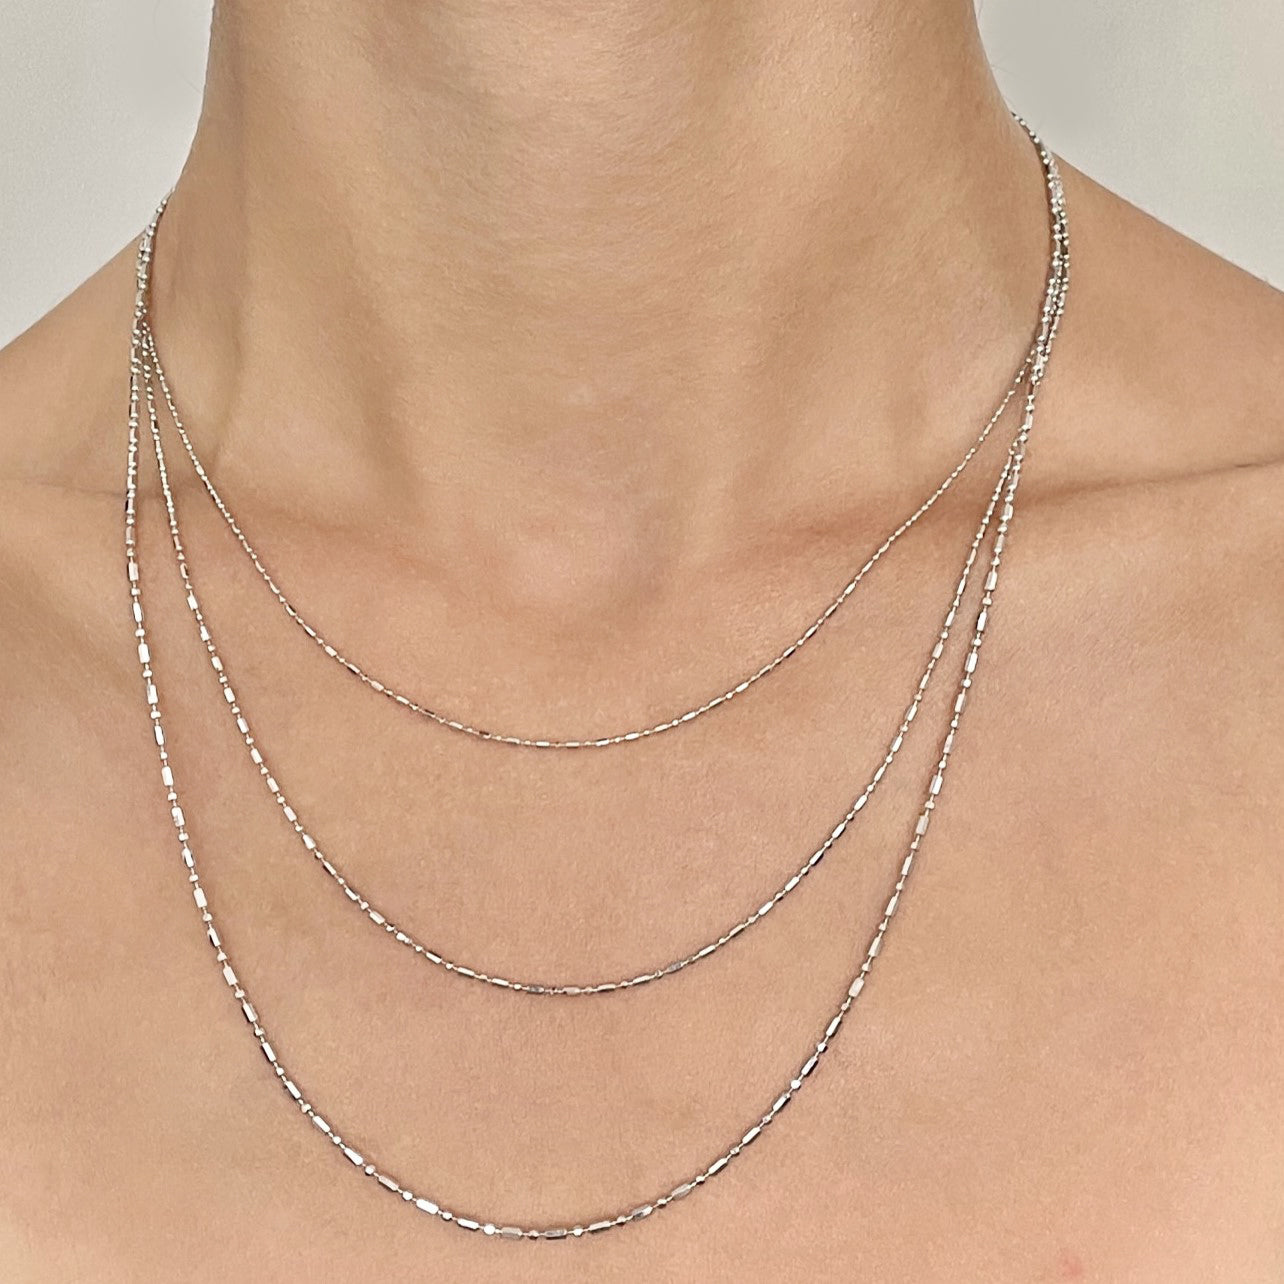 14K SOLID WHITE GOLD BEAD NECKLACE